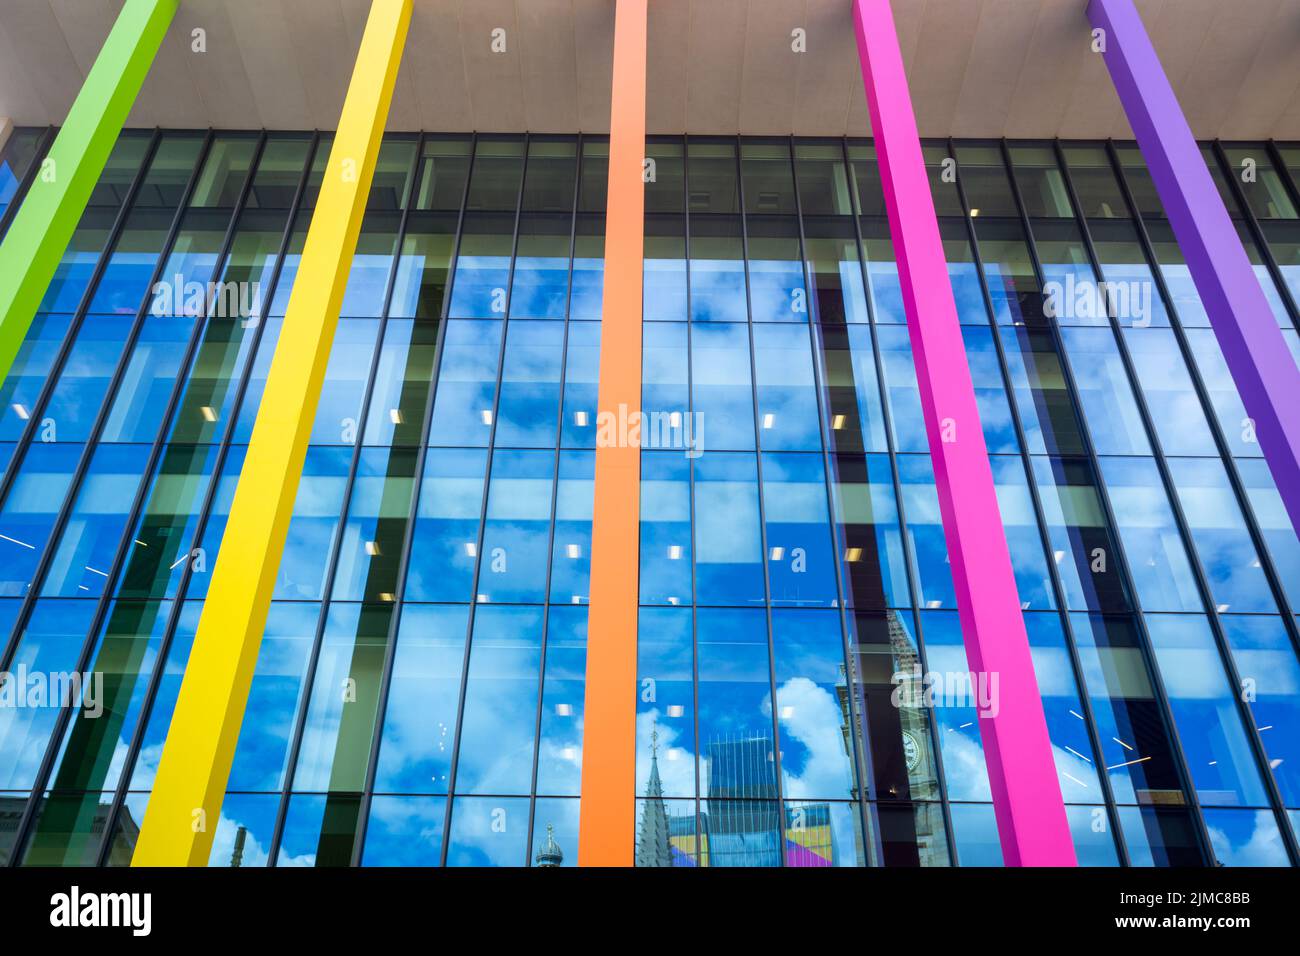 Glass fronted modern building with coloured pillars, Birmingham, UK Stock Photo